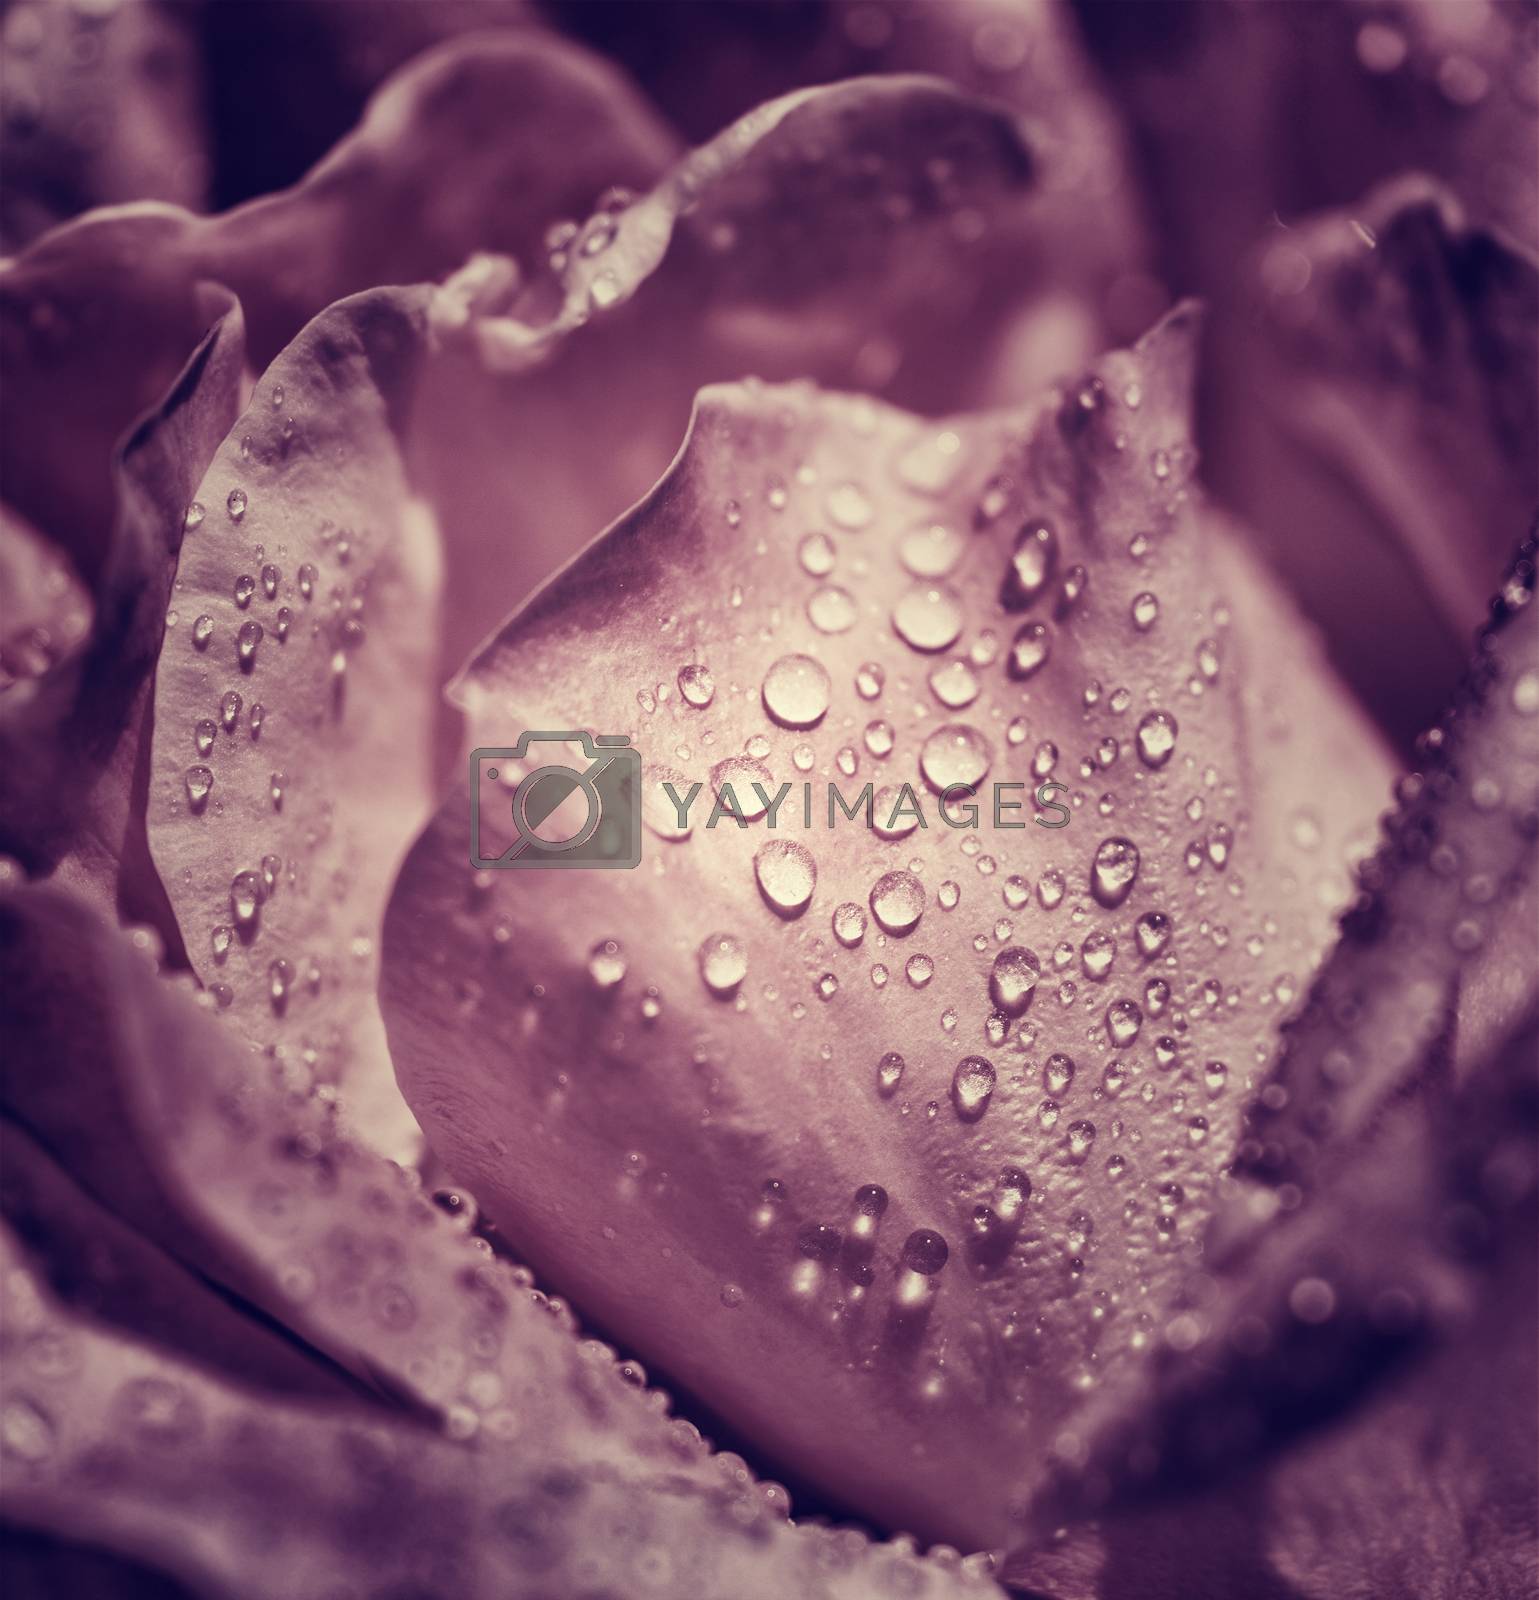 Royalty free image of Vintage rose background by Anna_Omelchenko